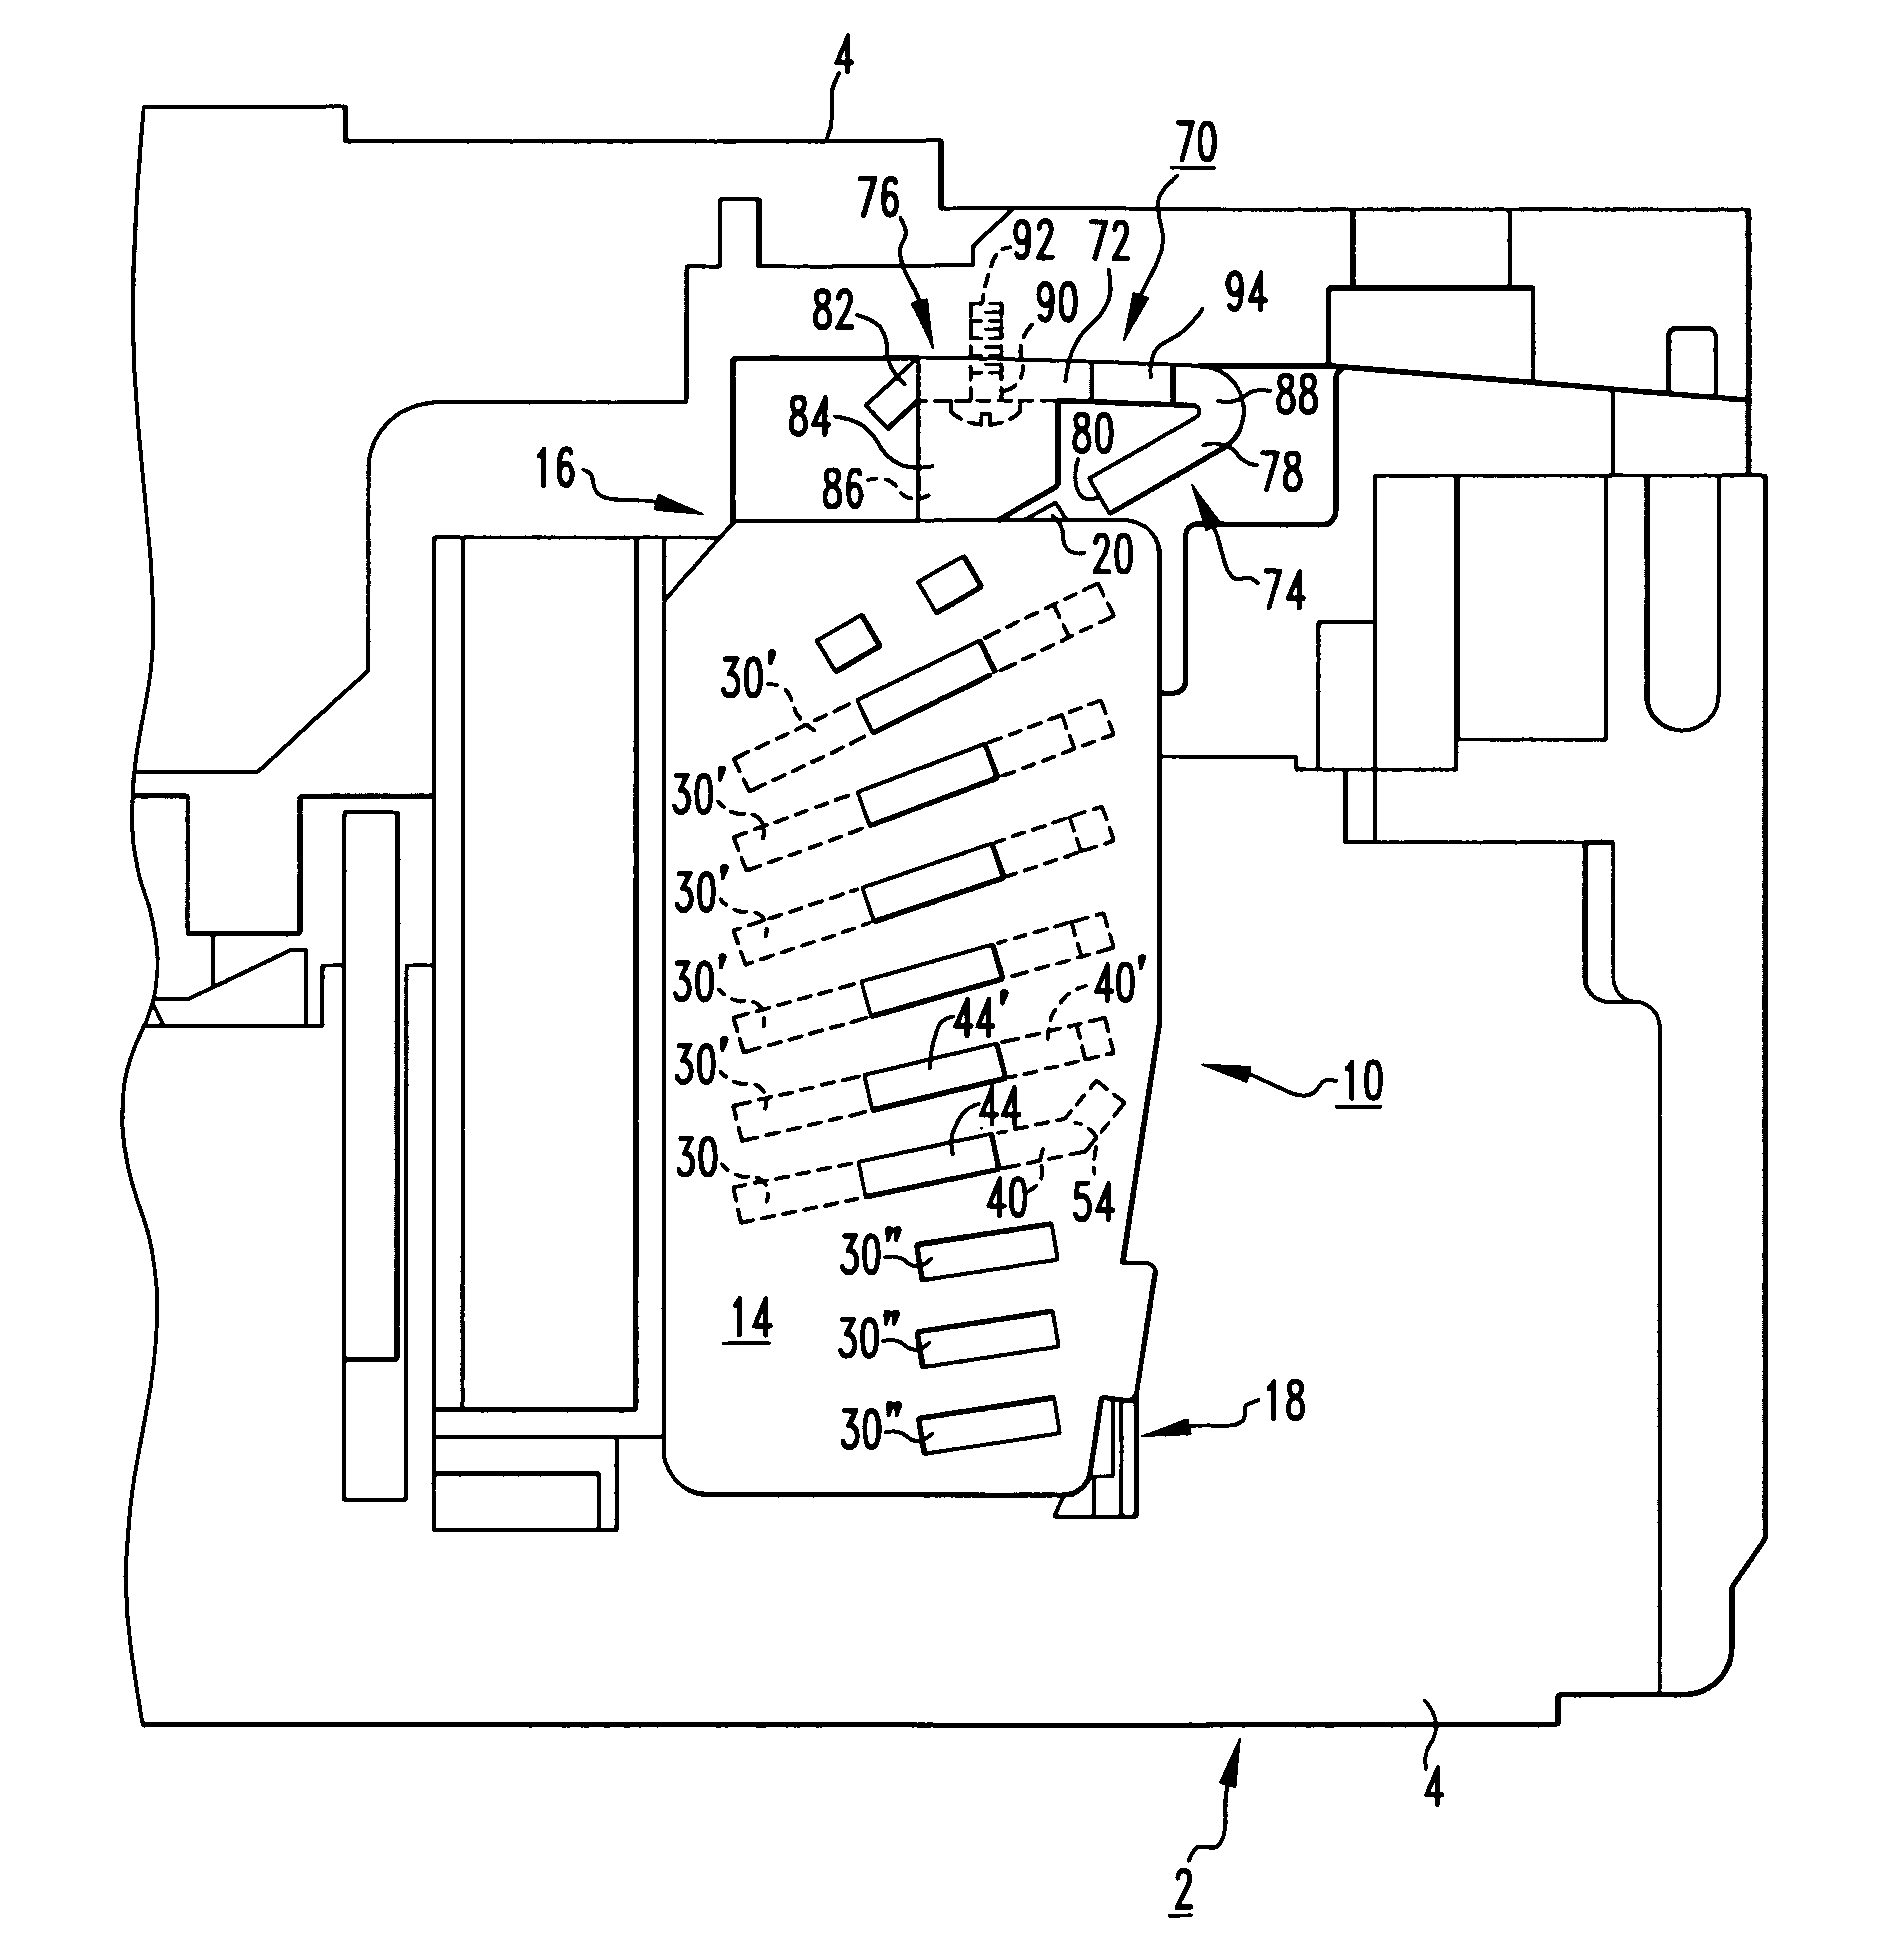 Secondary arc chute and electrical switching apparatus incorporating same